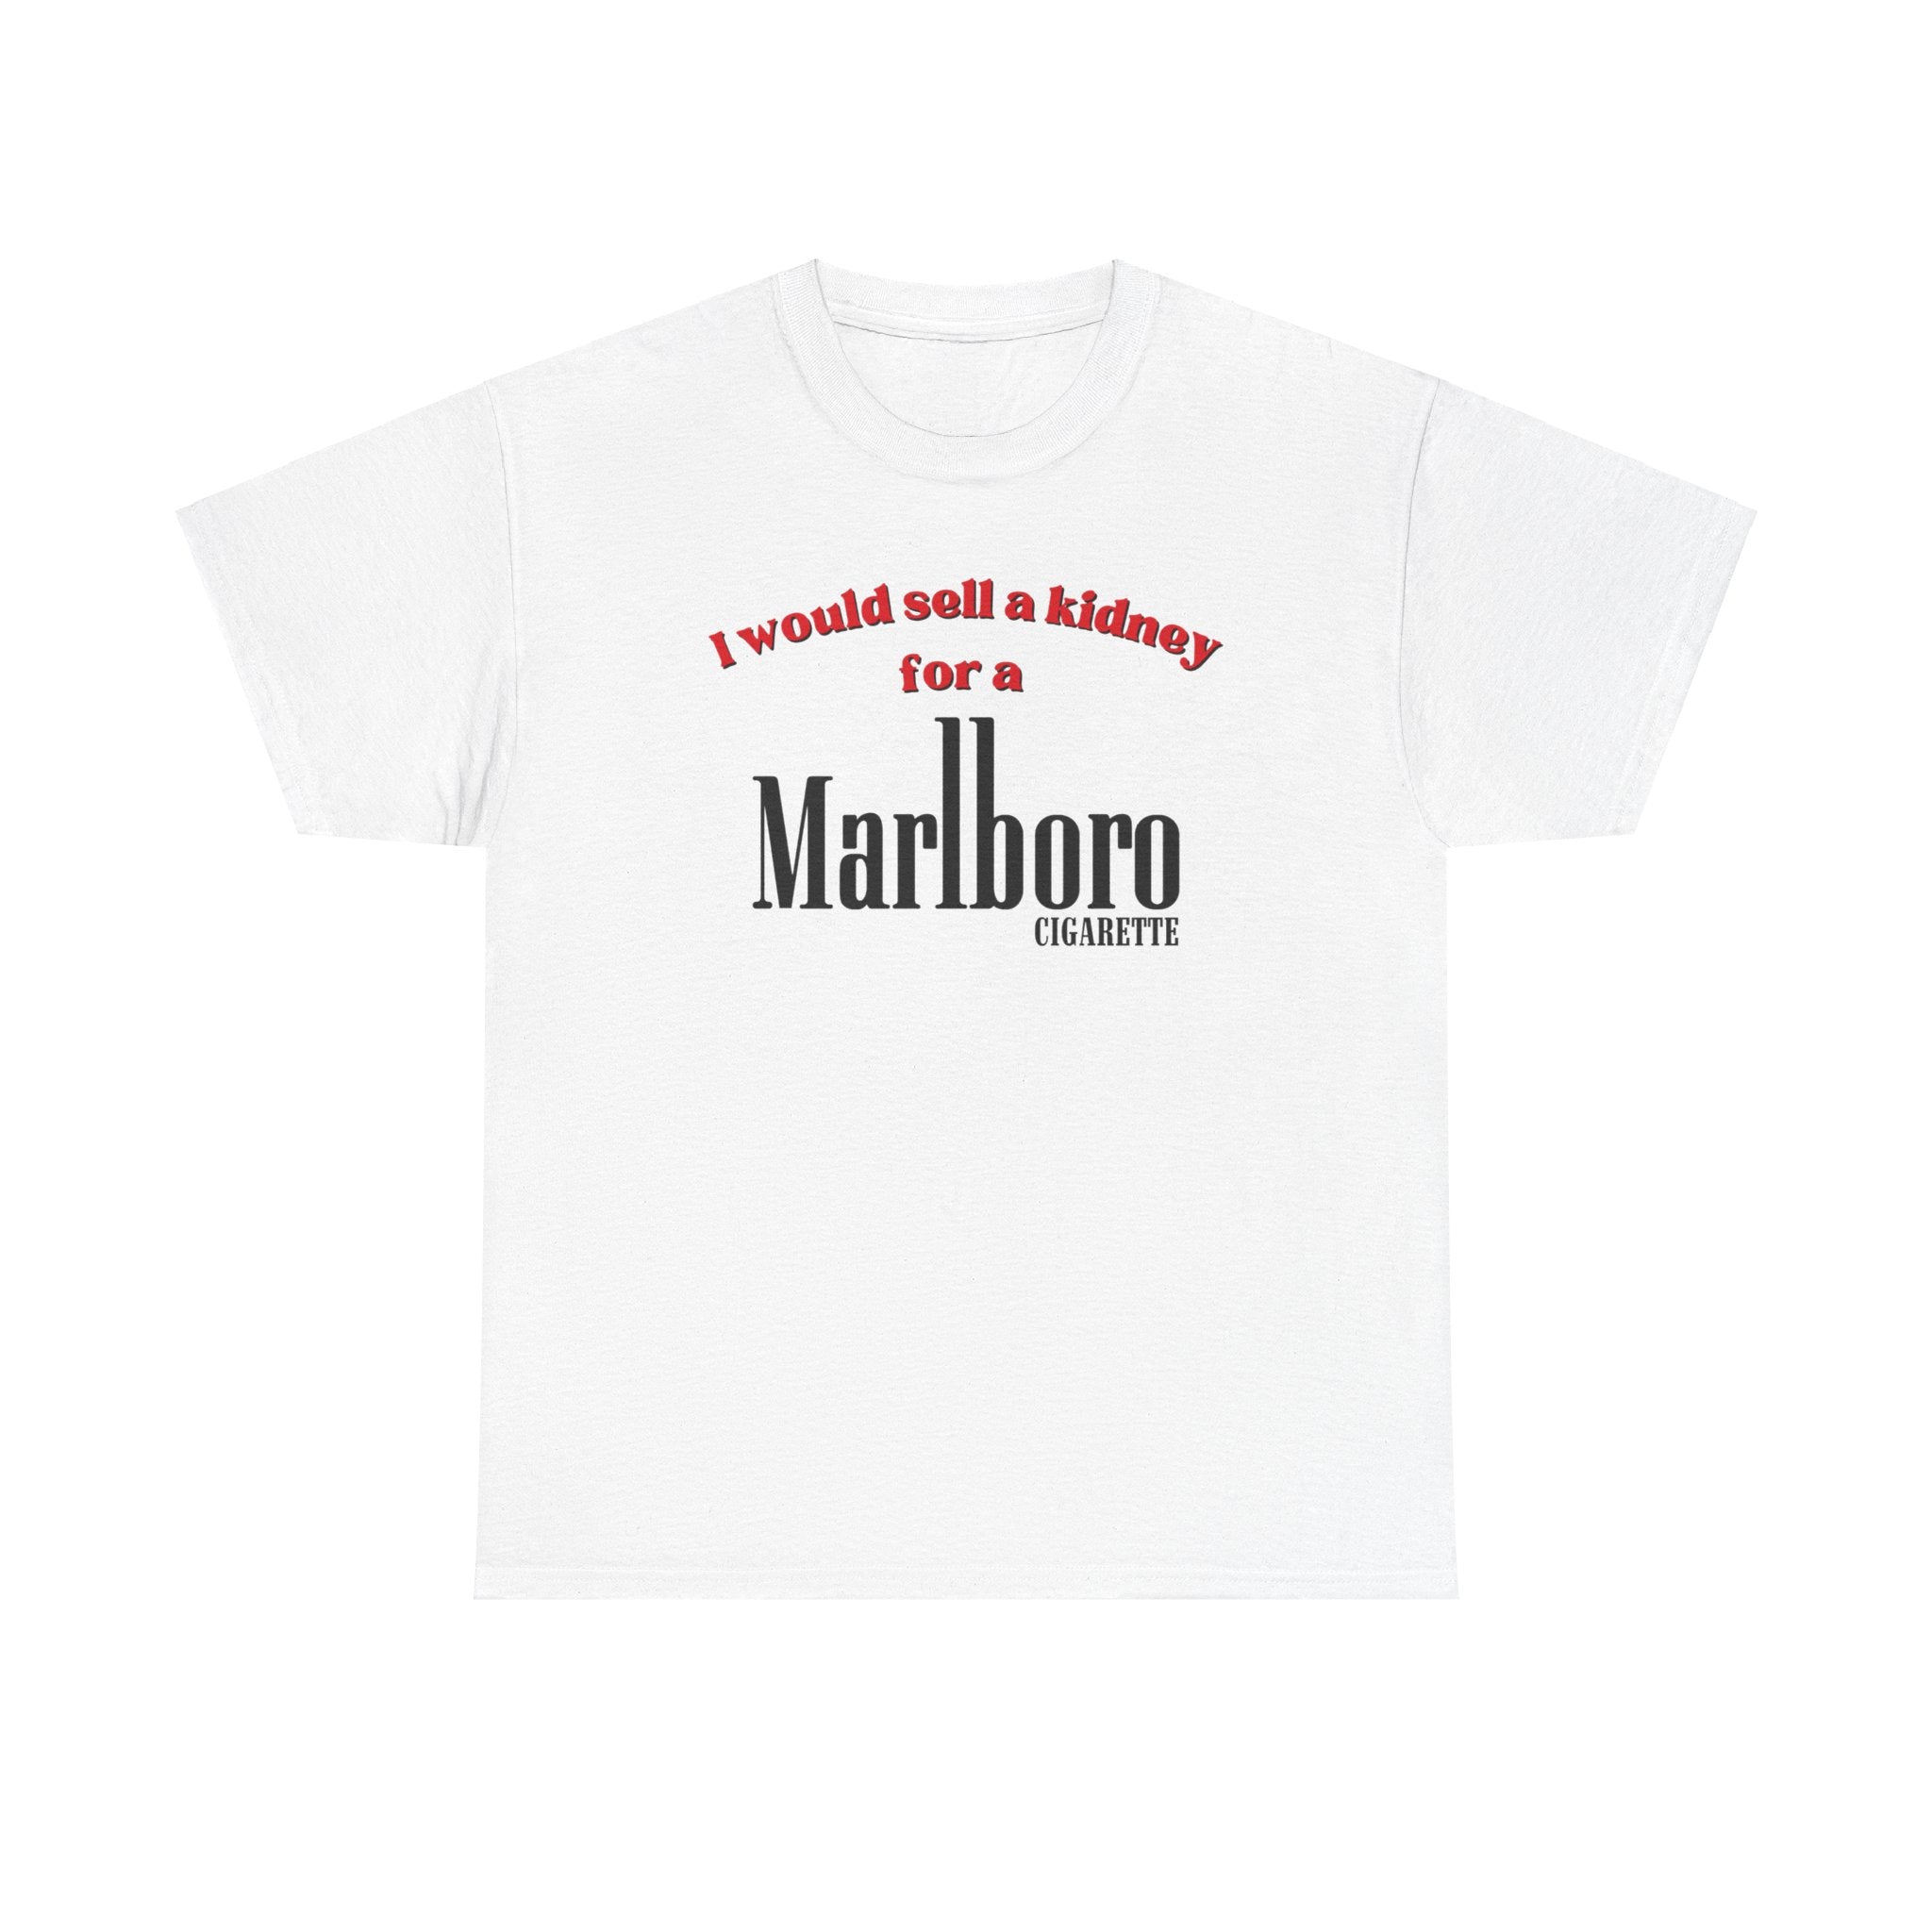 I Would Sell a Kidney for a Marlboro Cigarette